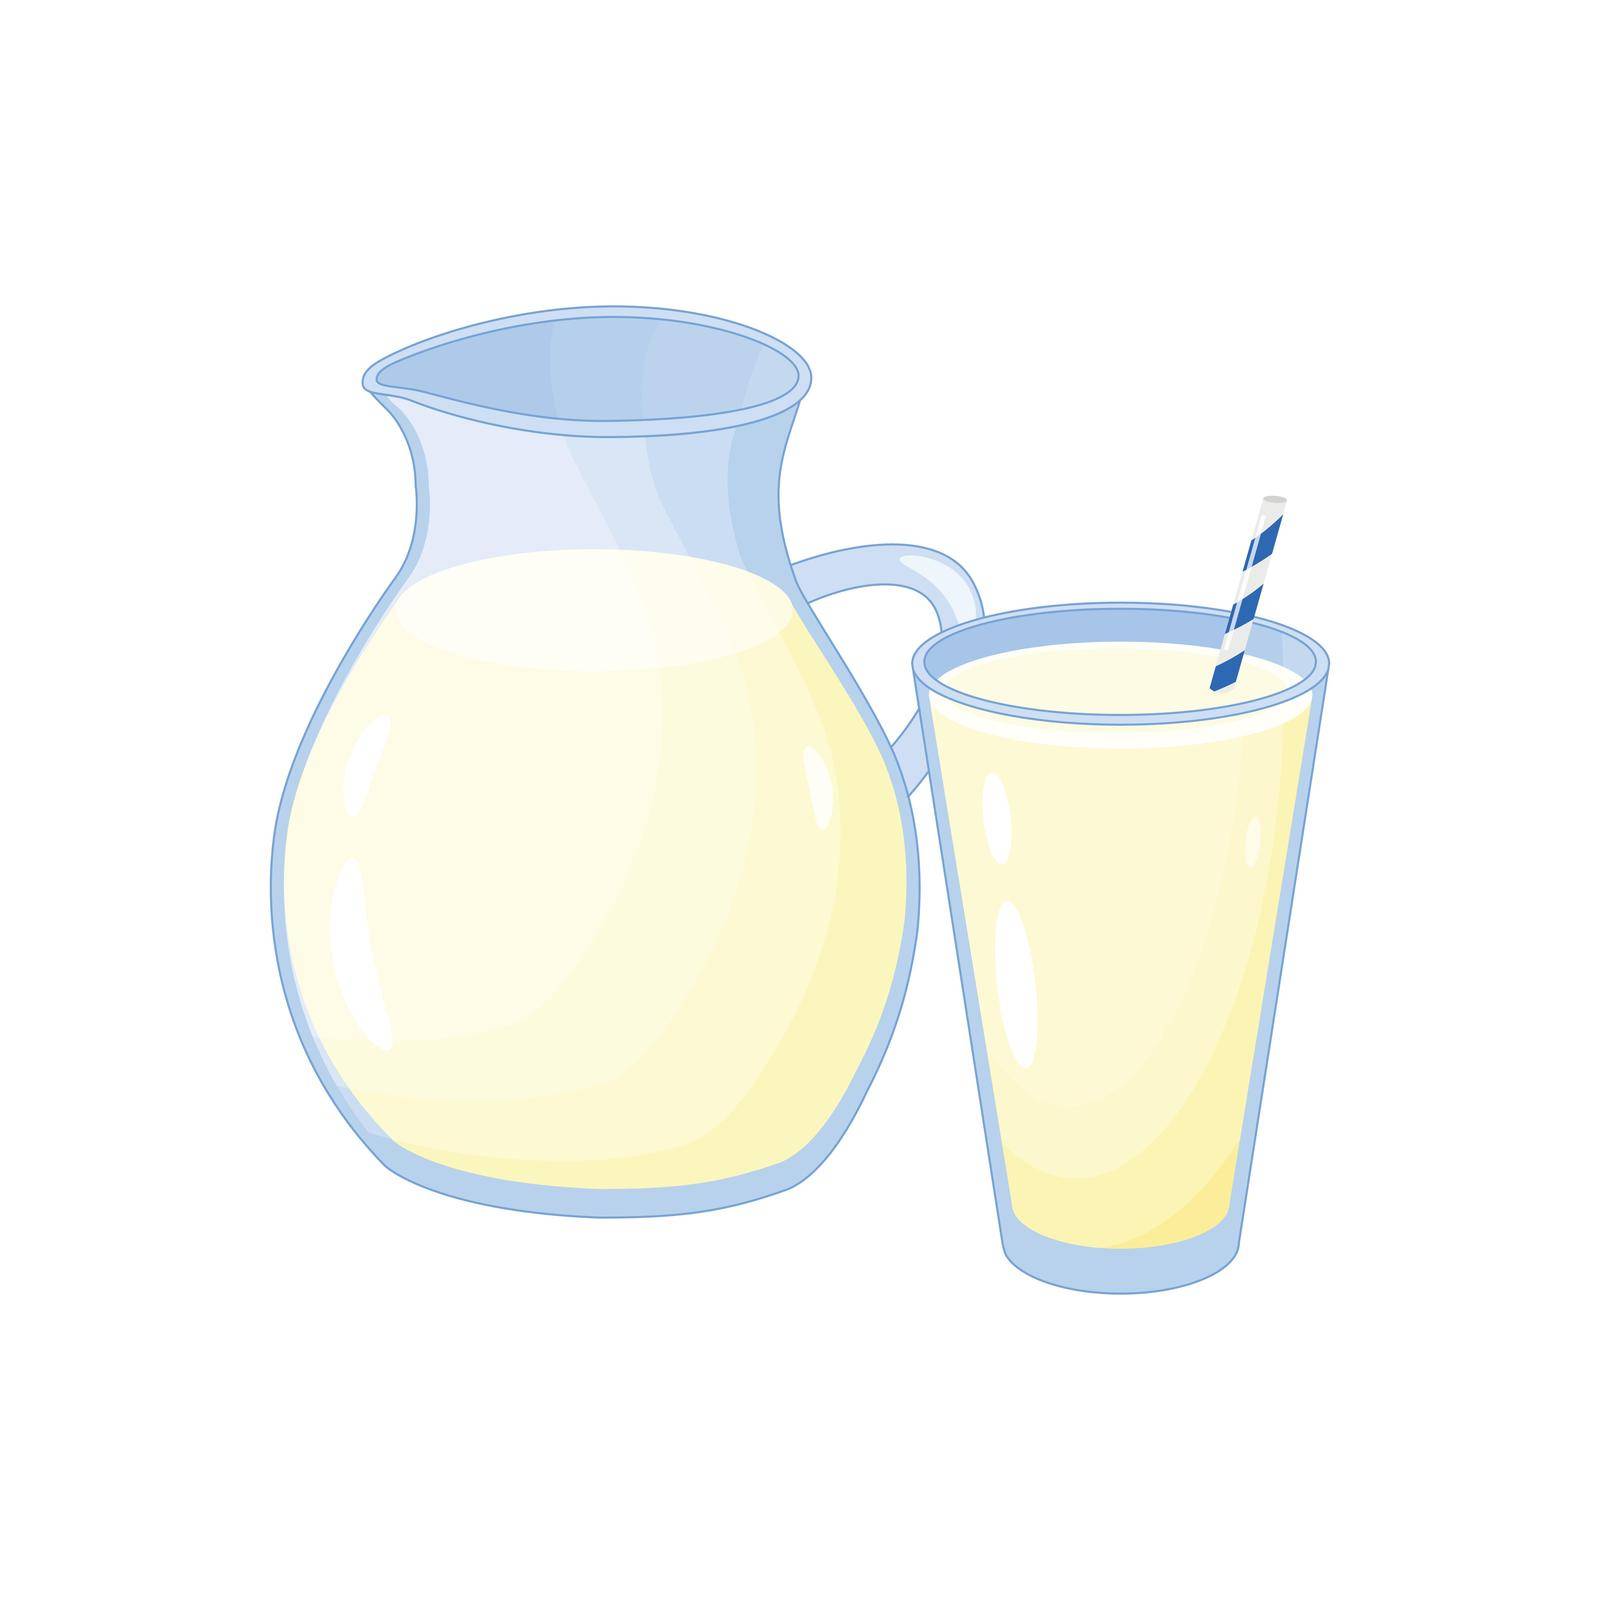 Cartoon milk in jar and glass isolated on white background.